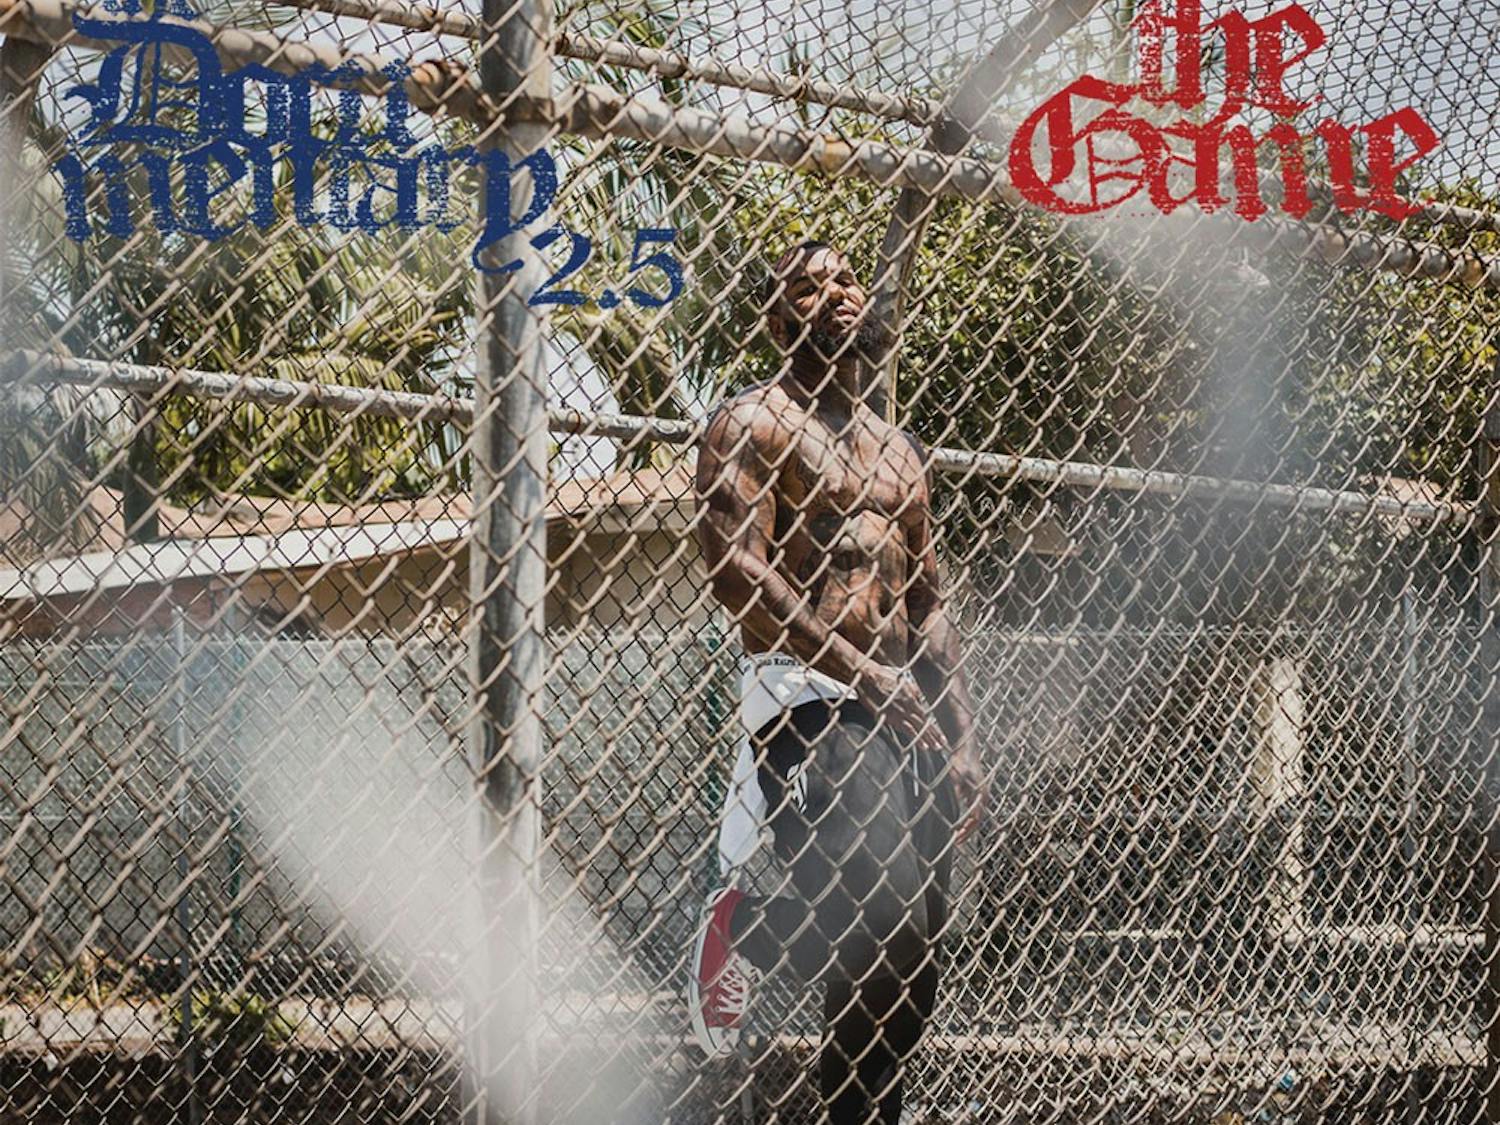 The Game released 18 unreleased tracks that didn't make it onto his Documentary 2 project on Documentary 2.5. In this back-to-back release, The Game traverses themes of gang violence, growing up in the projects and how an exploration of his violence shapes perspective.